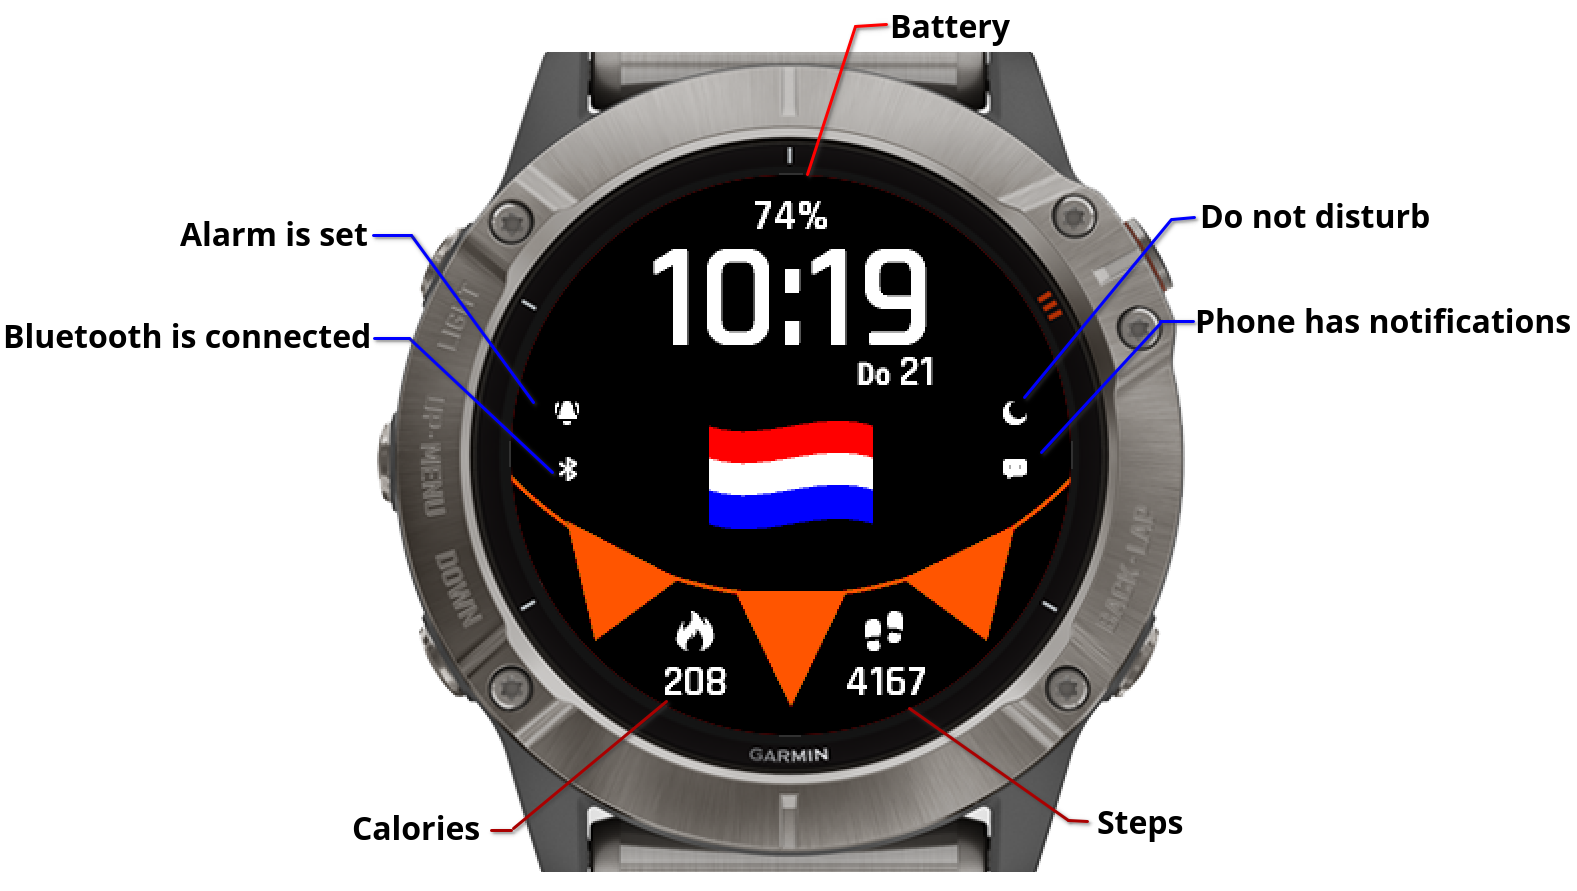 Watch face functionality